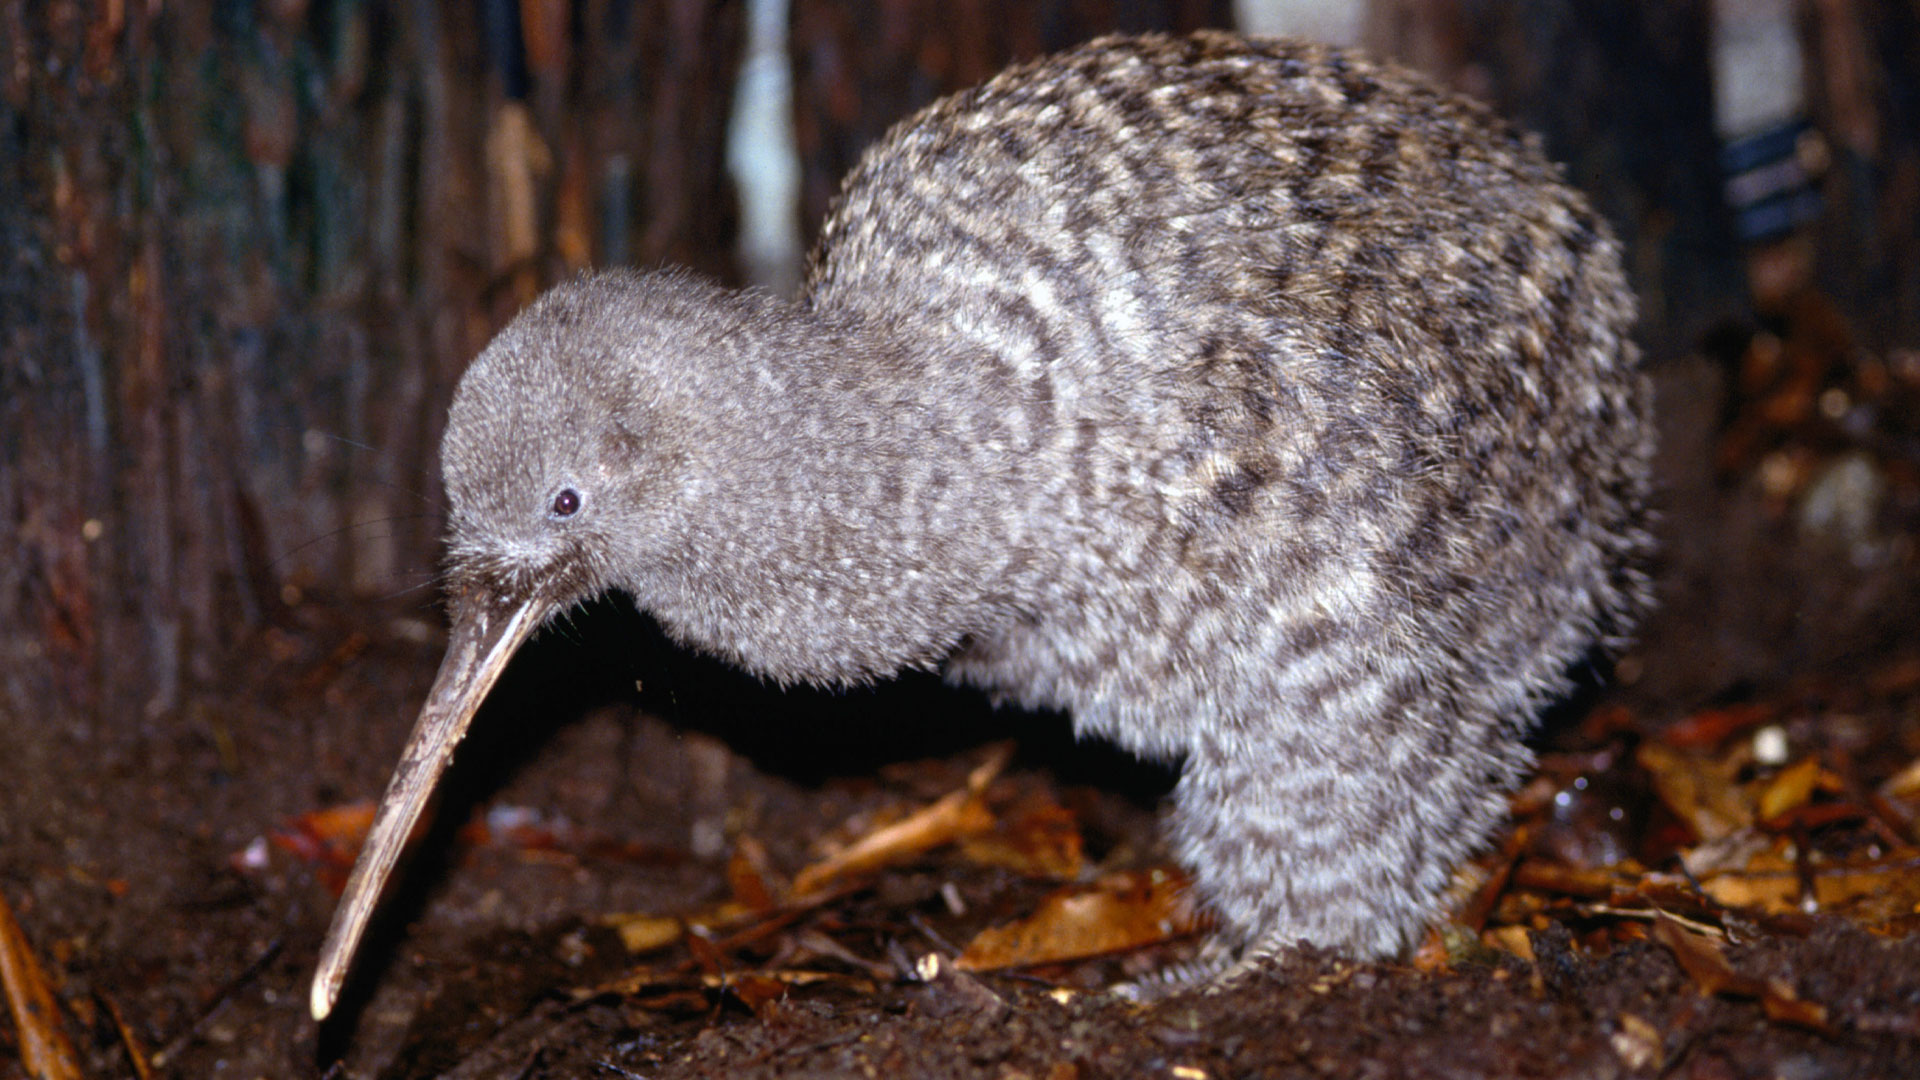 Kiwi bird in the forest at night.